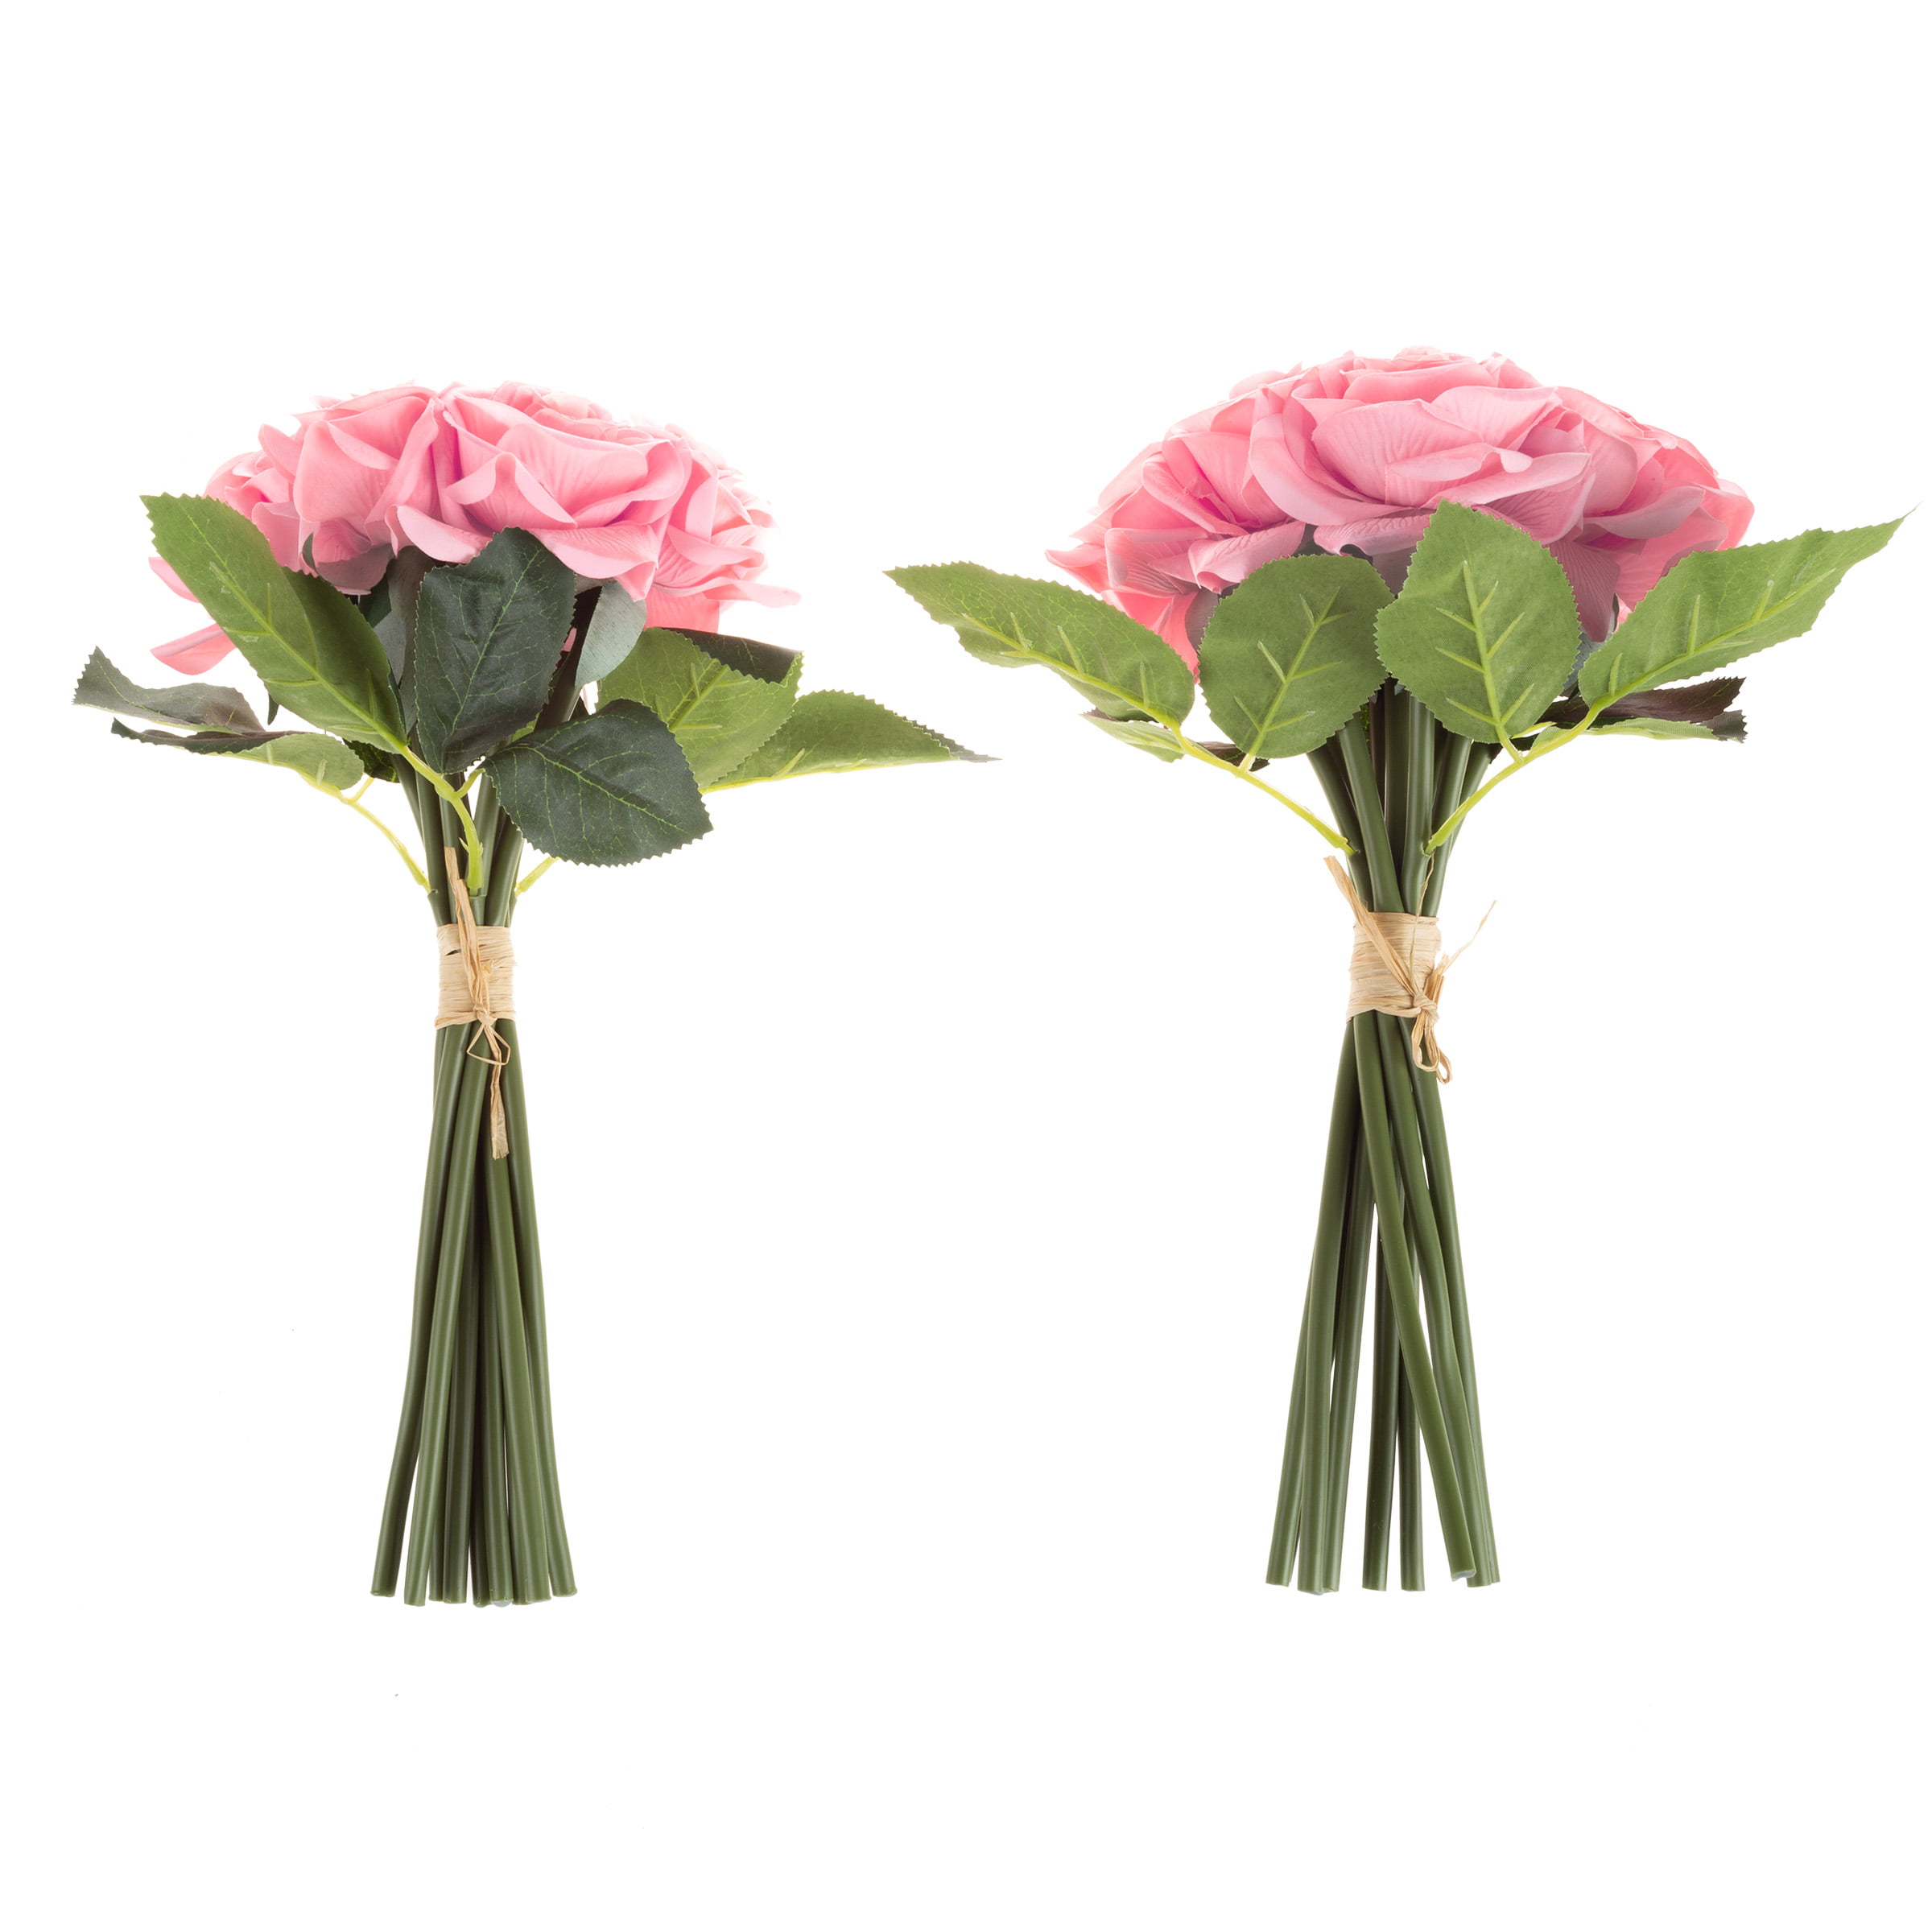 Velvety Artificial Roses Stems Faux Real Touch Rose Bouquet – the